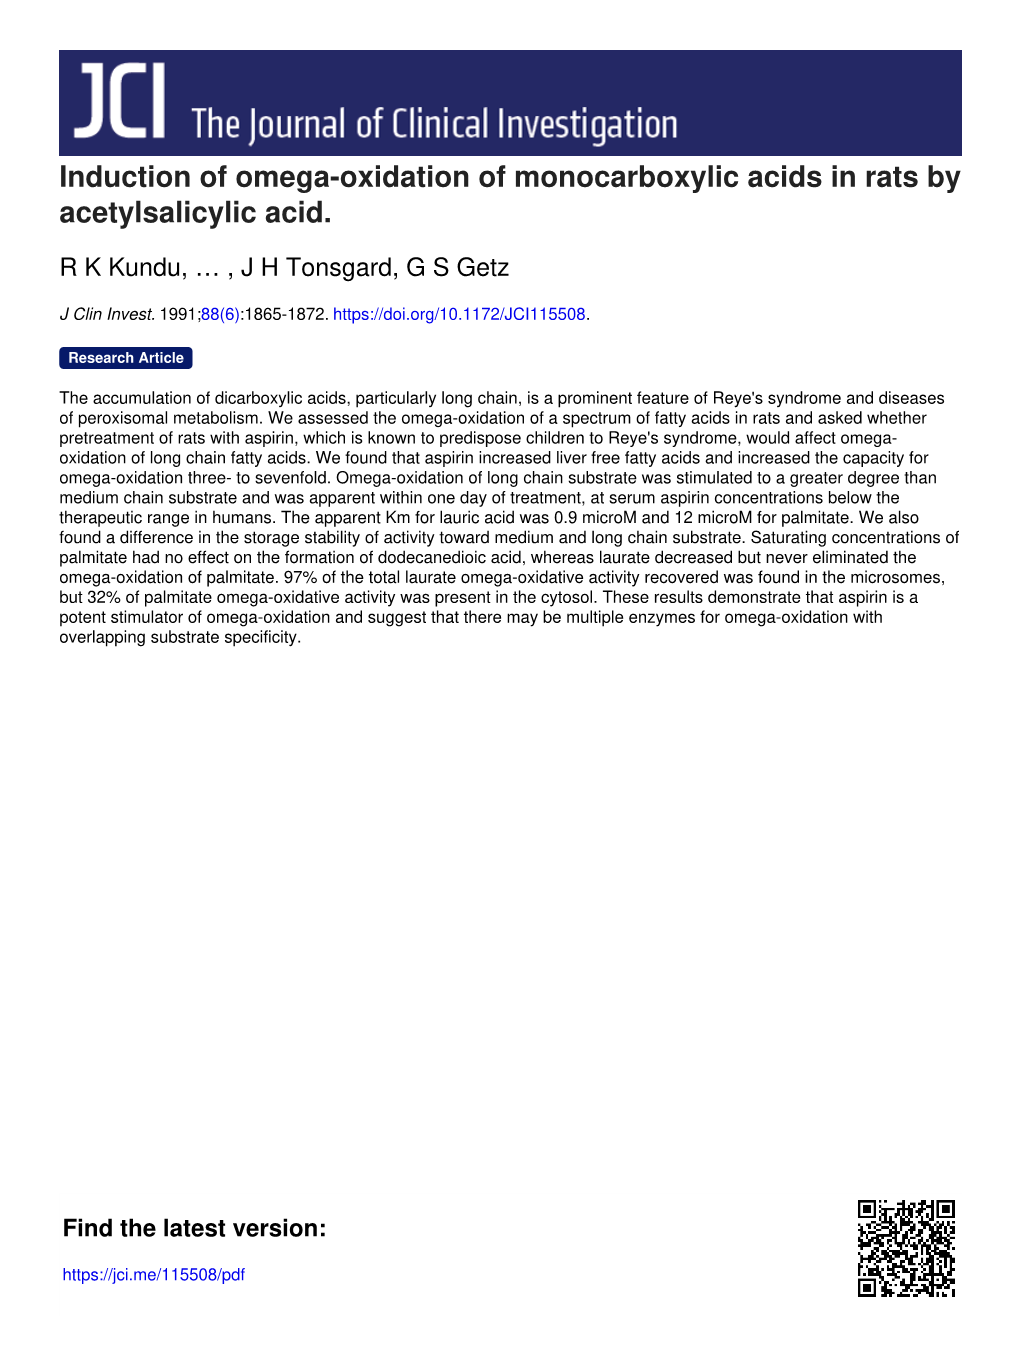 Induction of Omega-Oxidation of Monocarboxylic Acids in Rats by Acetylsalicylic Acid